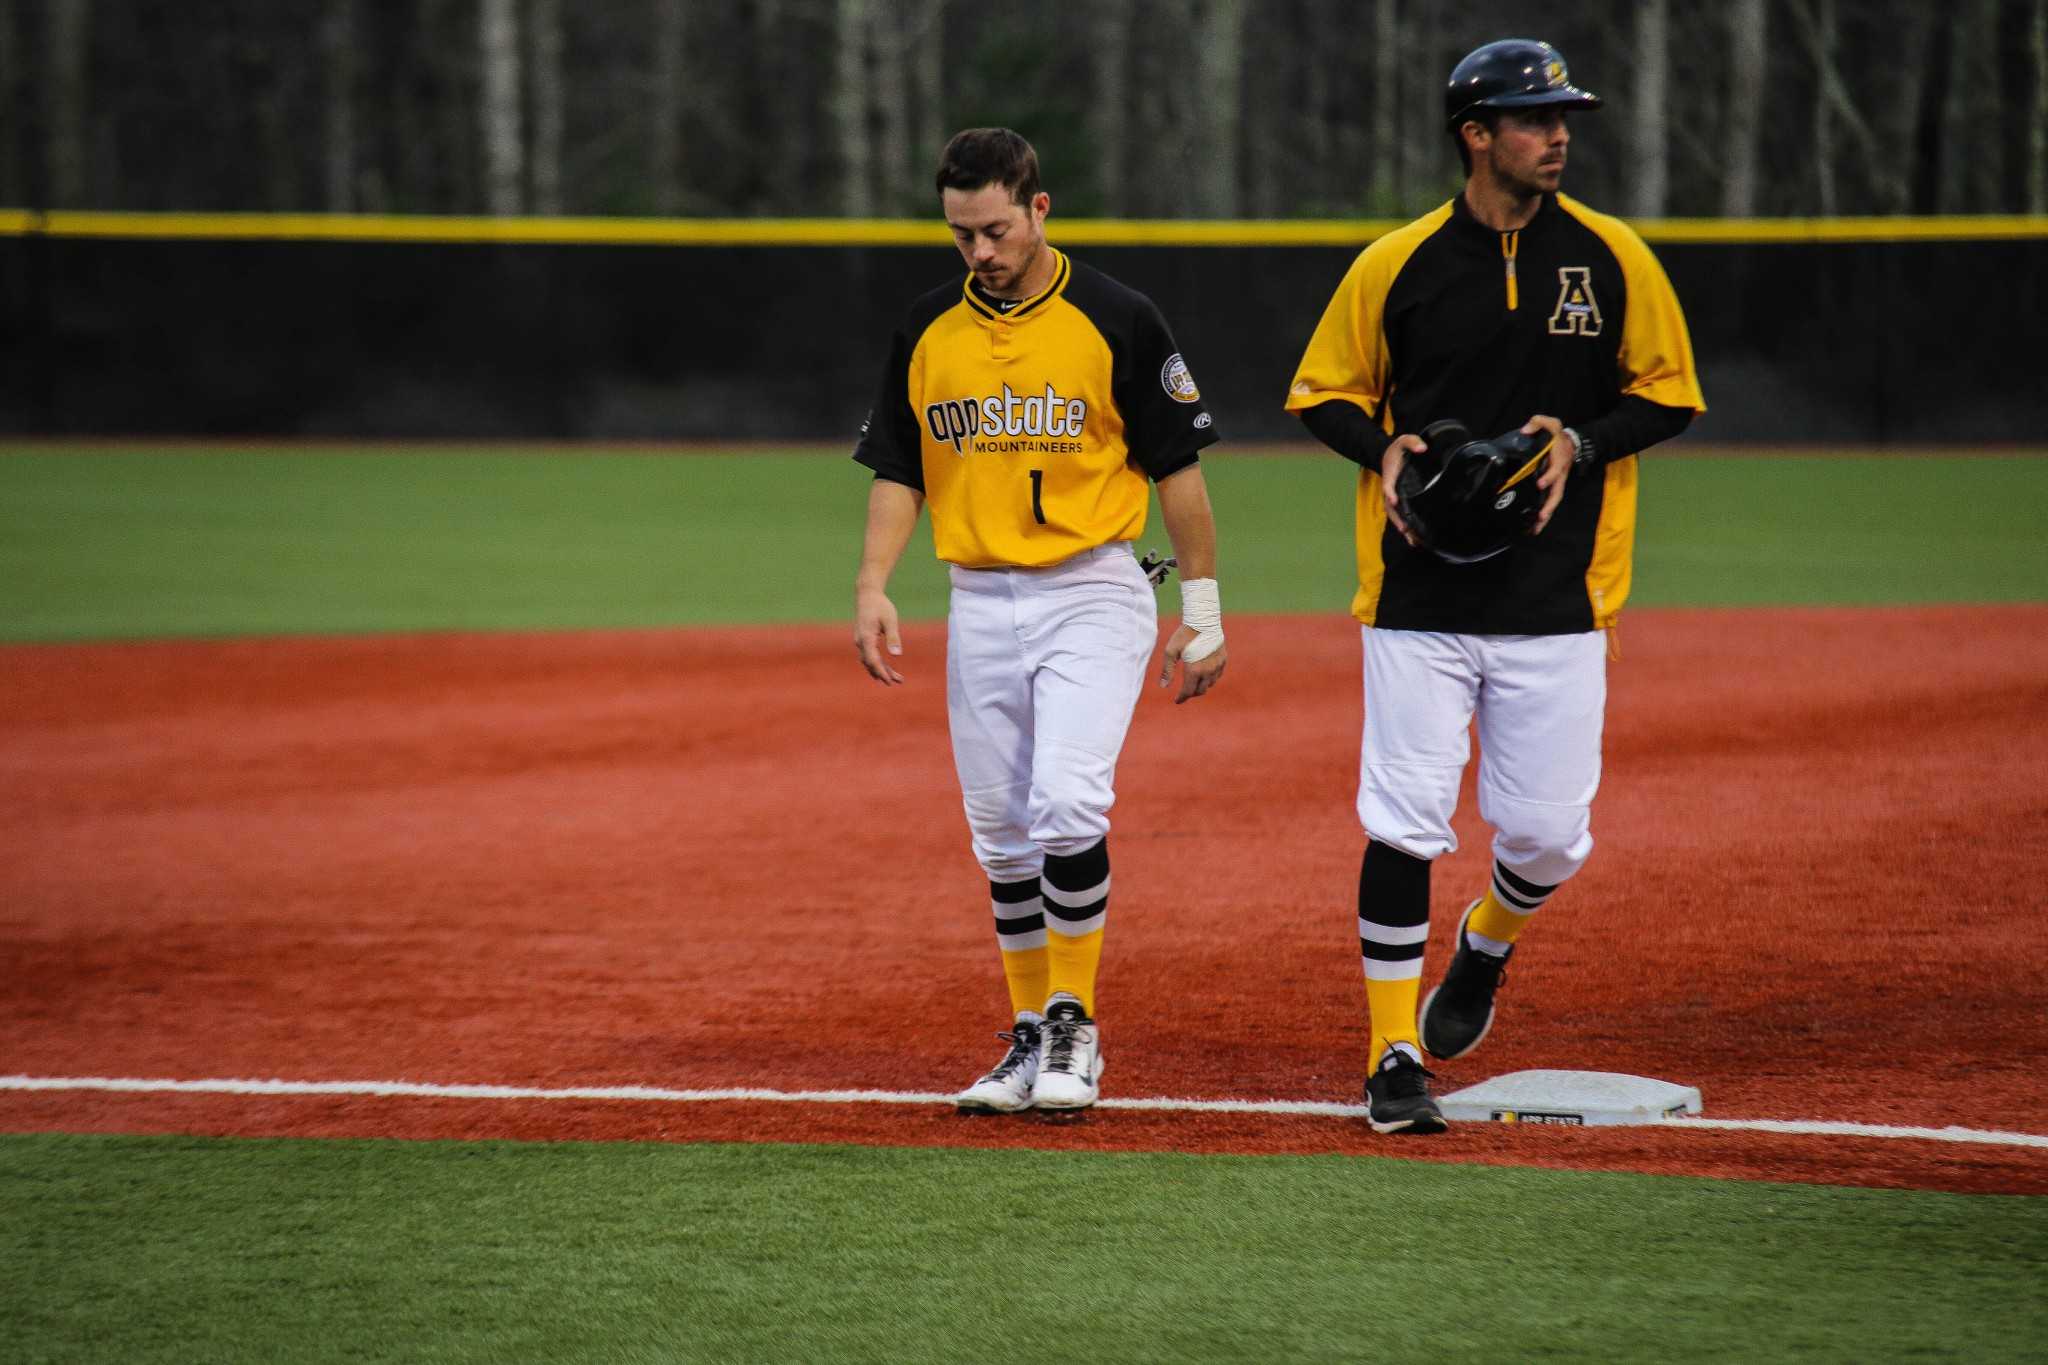 Junior outfielder Brandon Burris (left) walks off the field during App State's series opener against Georgia State. The Mountaineers had multiple defensive errors that resulted in a 4-3 loss in 12 innings. Photo: Gerrit Van Genderen | The Appalachian